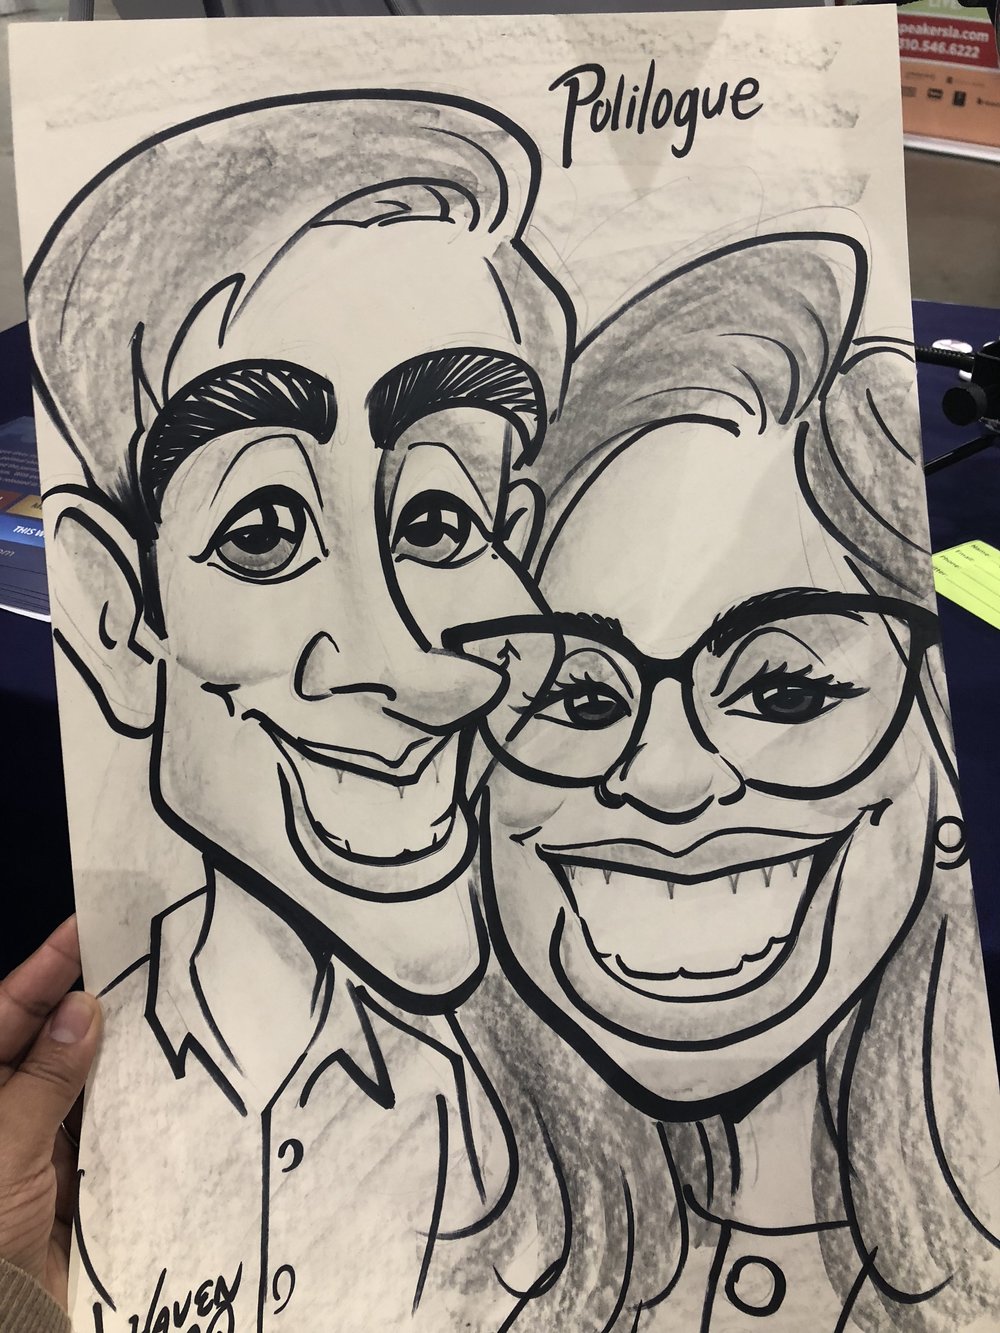 Big thanks to Haven AQ who did this awesome caricature of us. Haven was our exhibitor-neighbor and did all the illustrations for Deplorables the Game. He’s an incredible artist and you should book him asap for your next event.